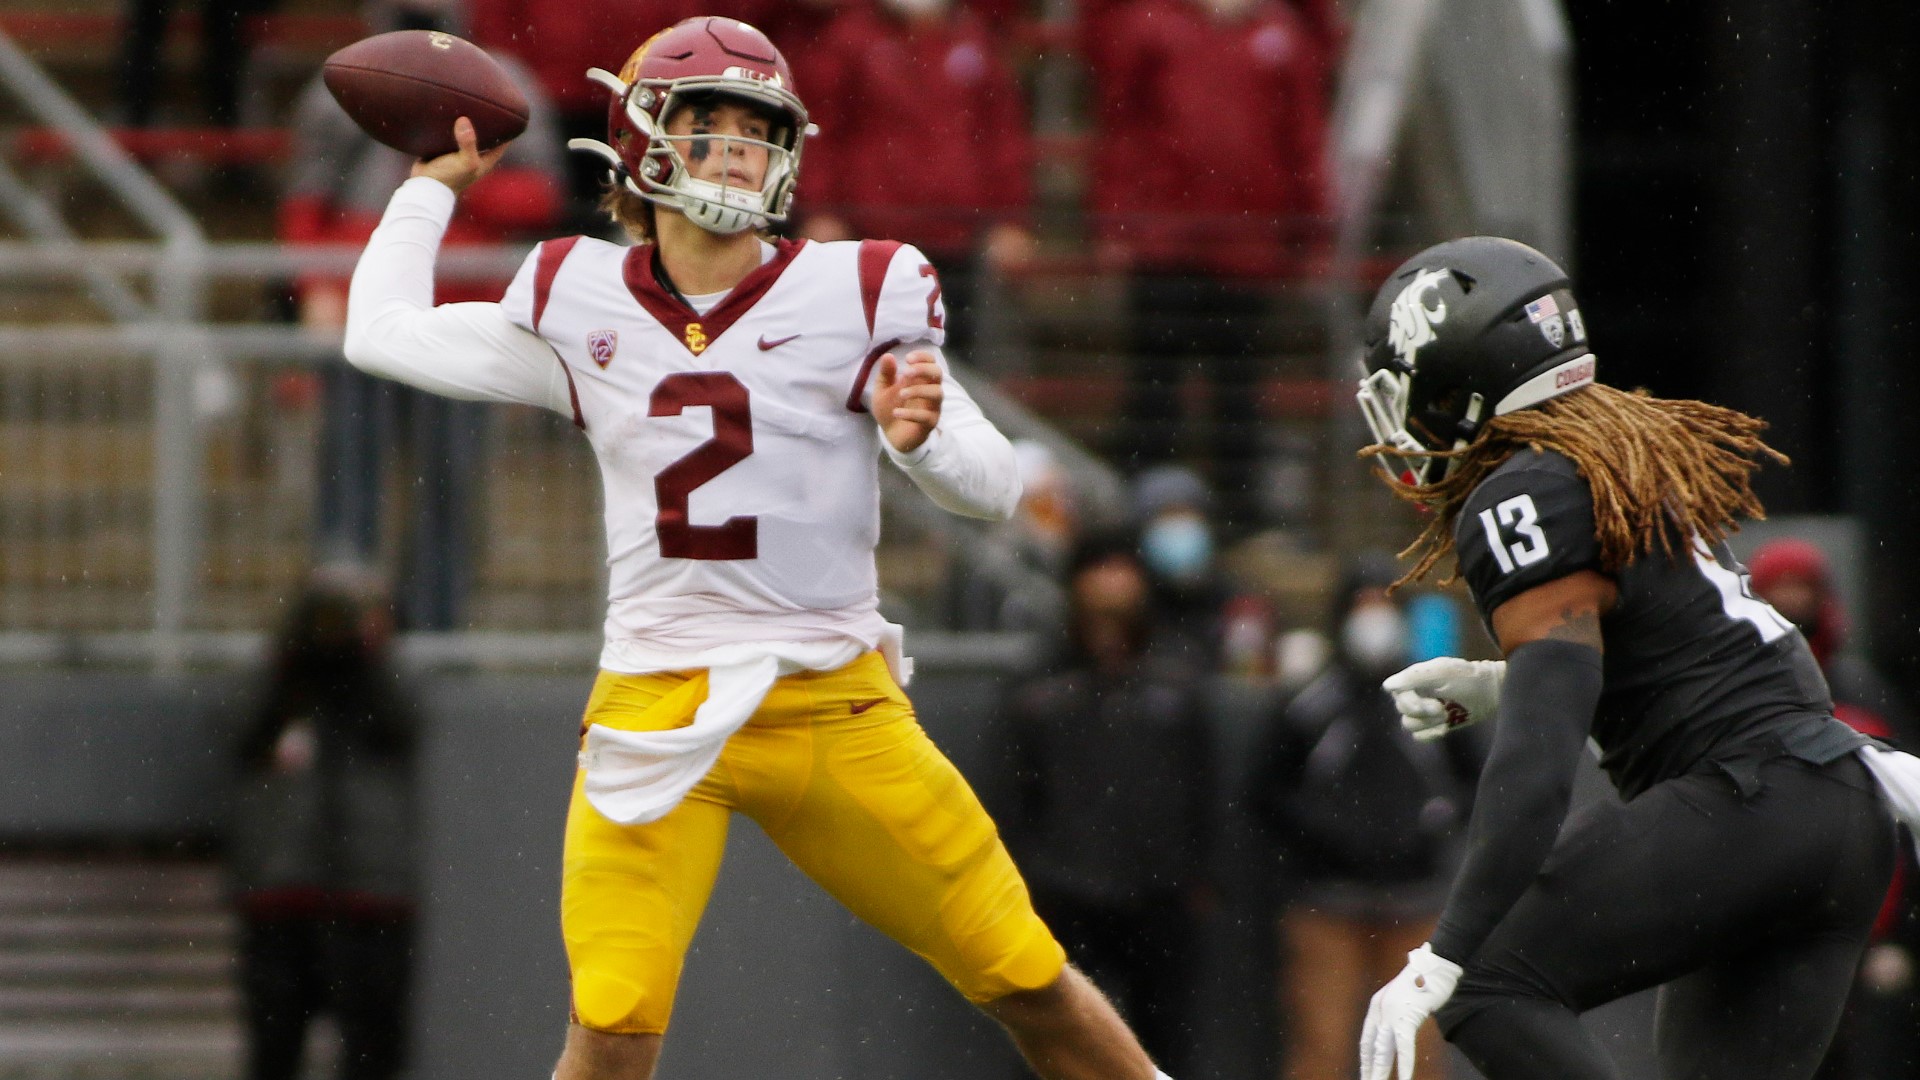 The WSU Cougars and USC Trojans faced off in a rainy day game.